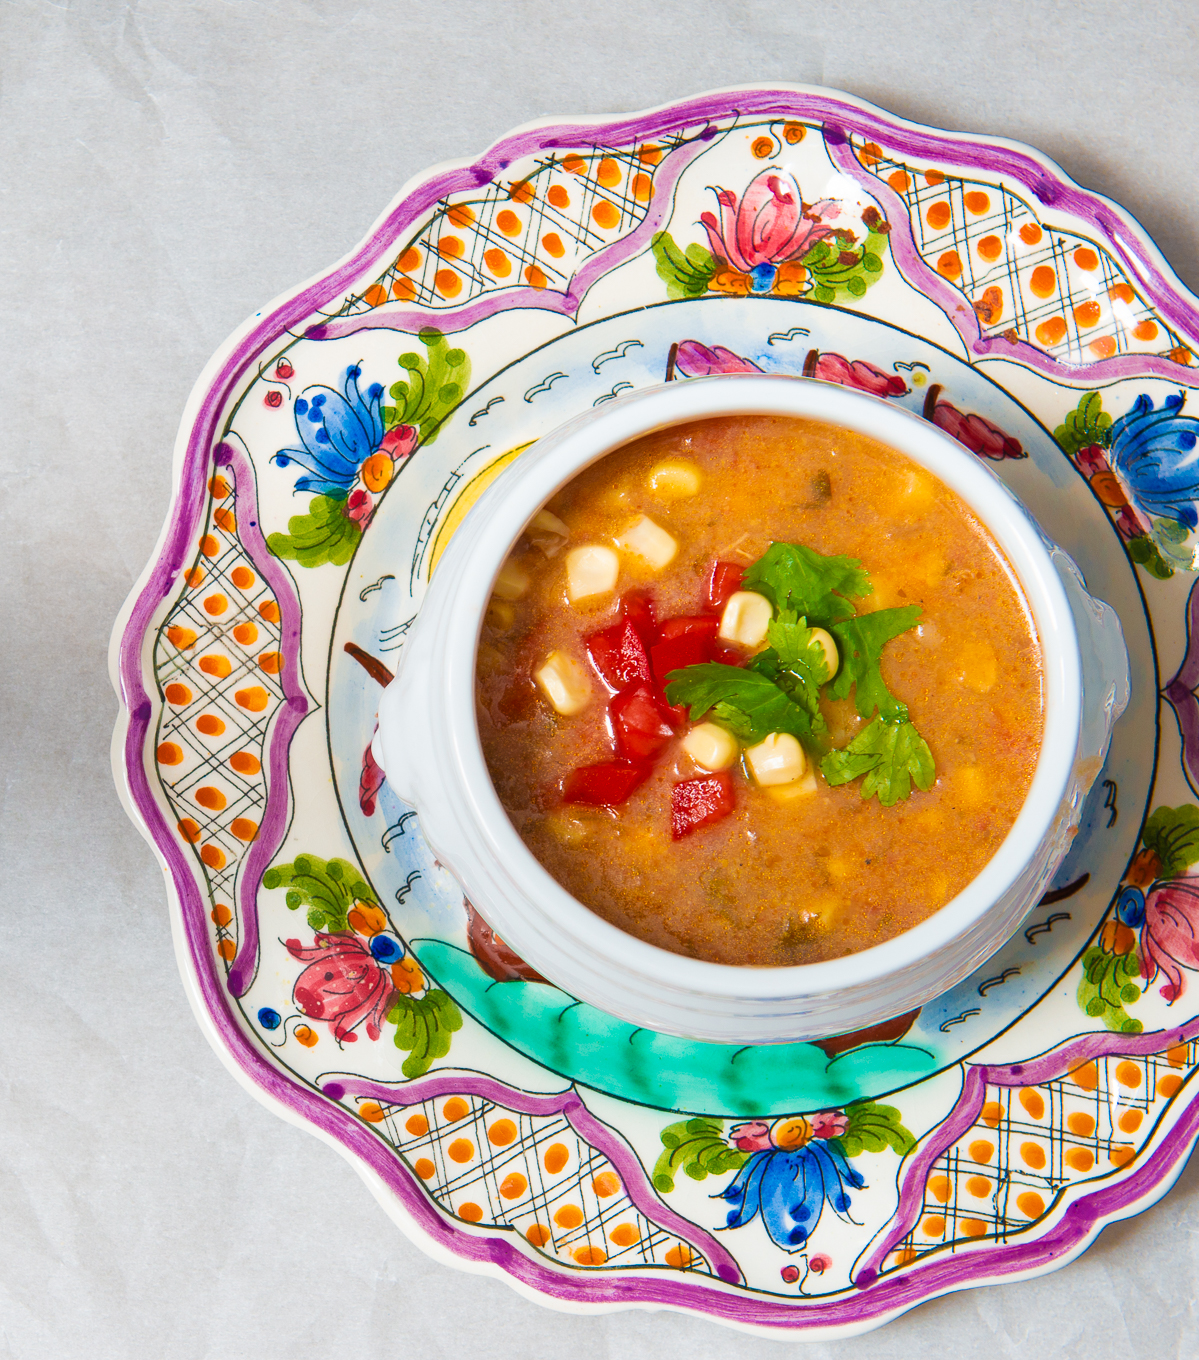 One Summer’s Day: Fresh Tomato and Corn Soup